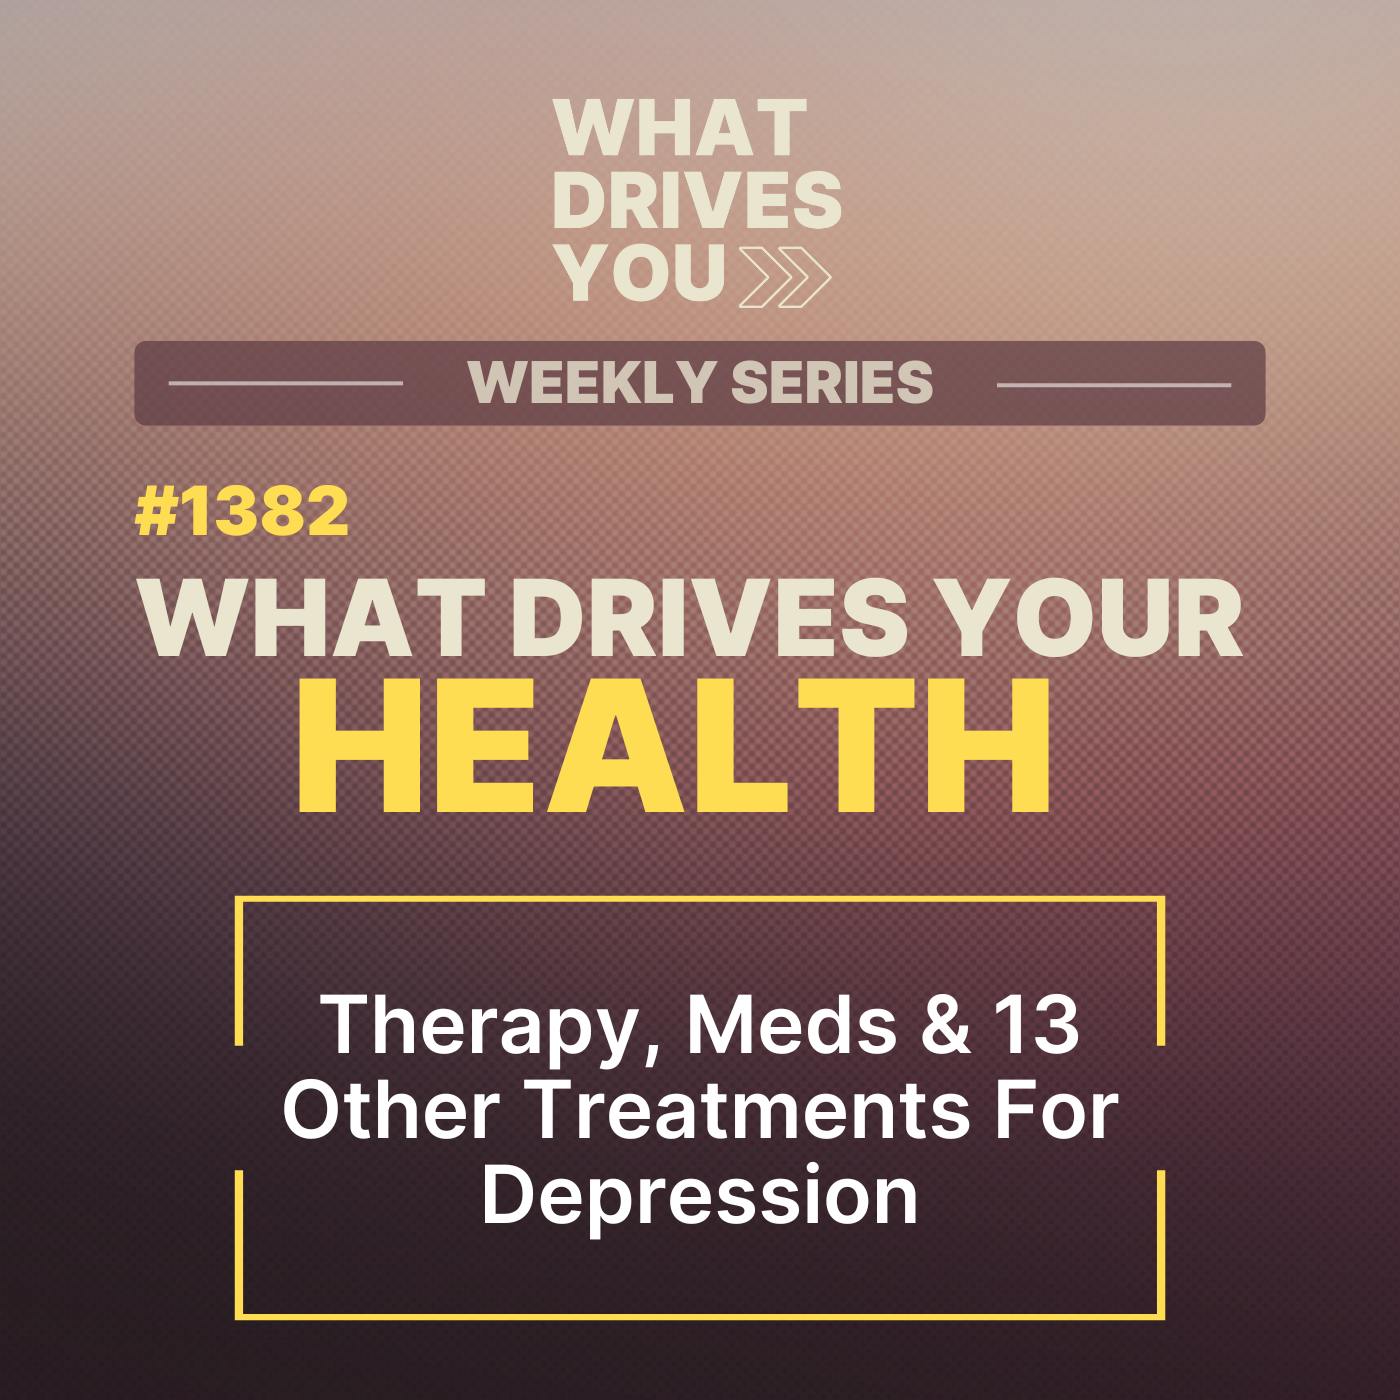 Therapy, Meds & 13 Other Treatments For Depression